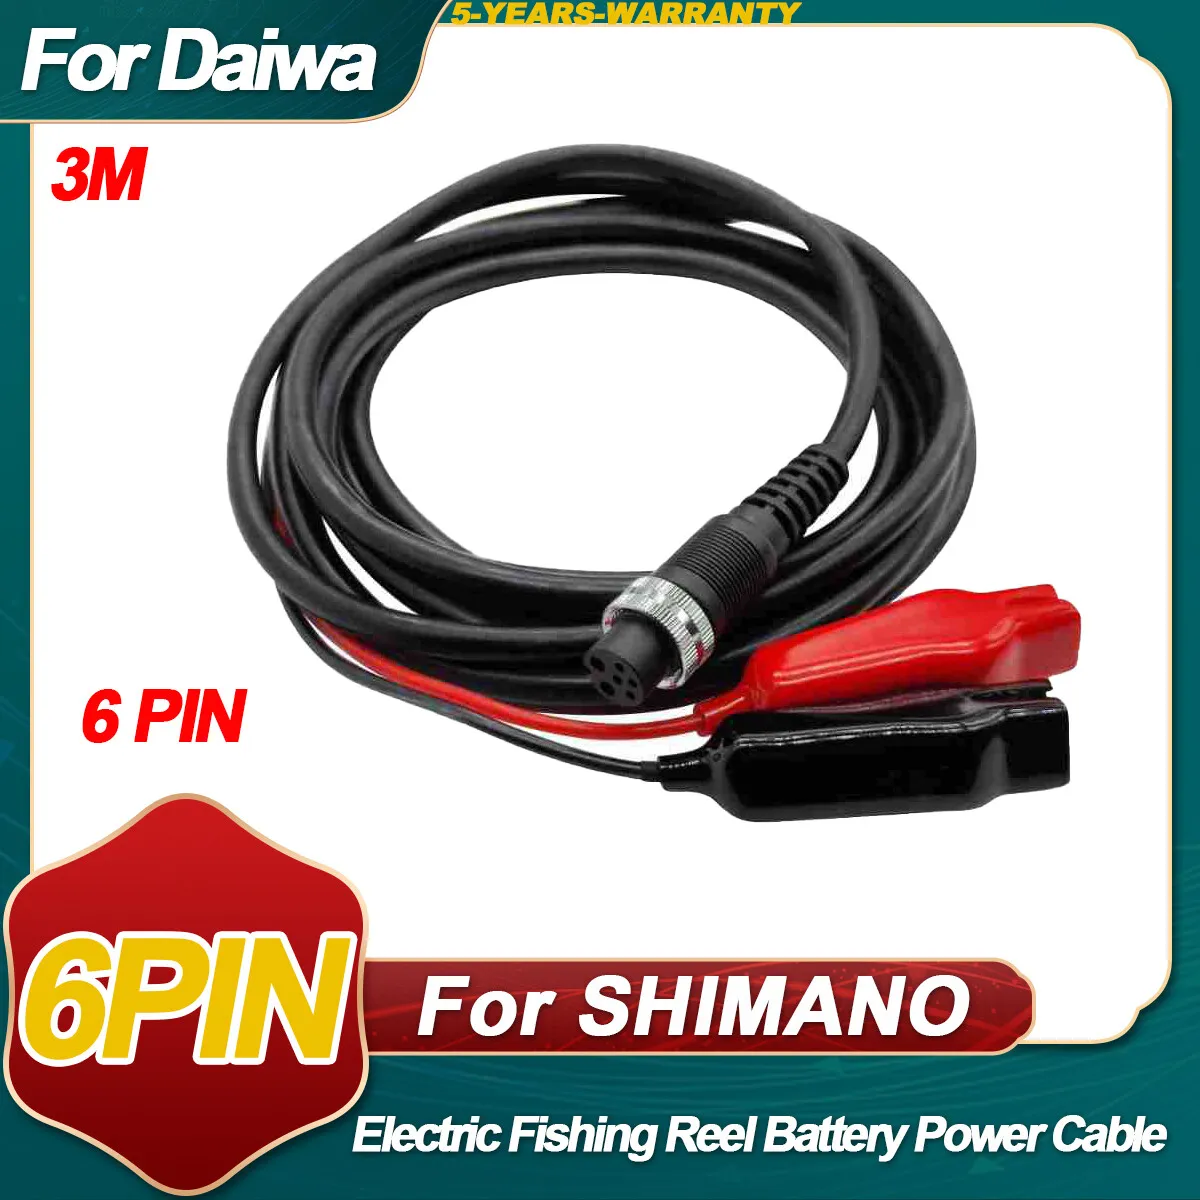 3.0M Power Cable For Shimano 6PIN Electric Reel Power Cord 6 Pin For  Plemio3000 